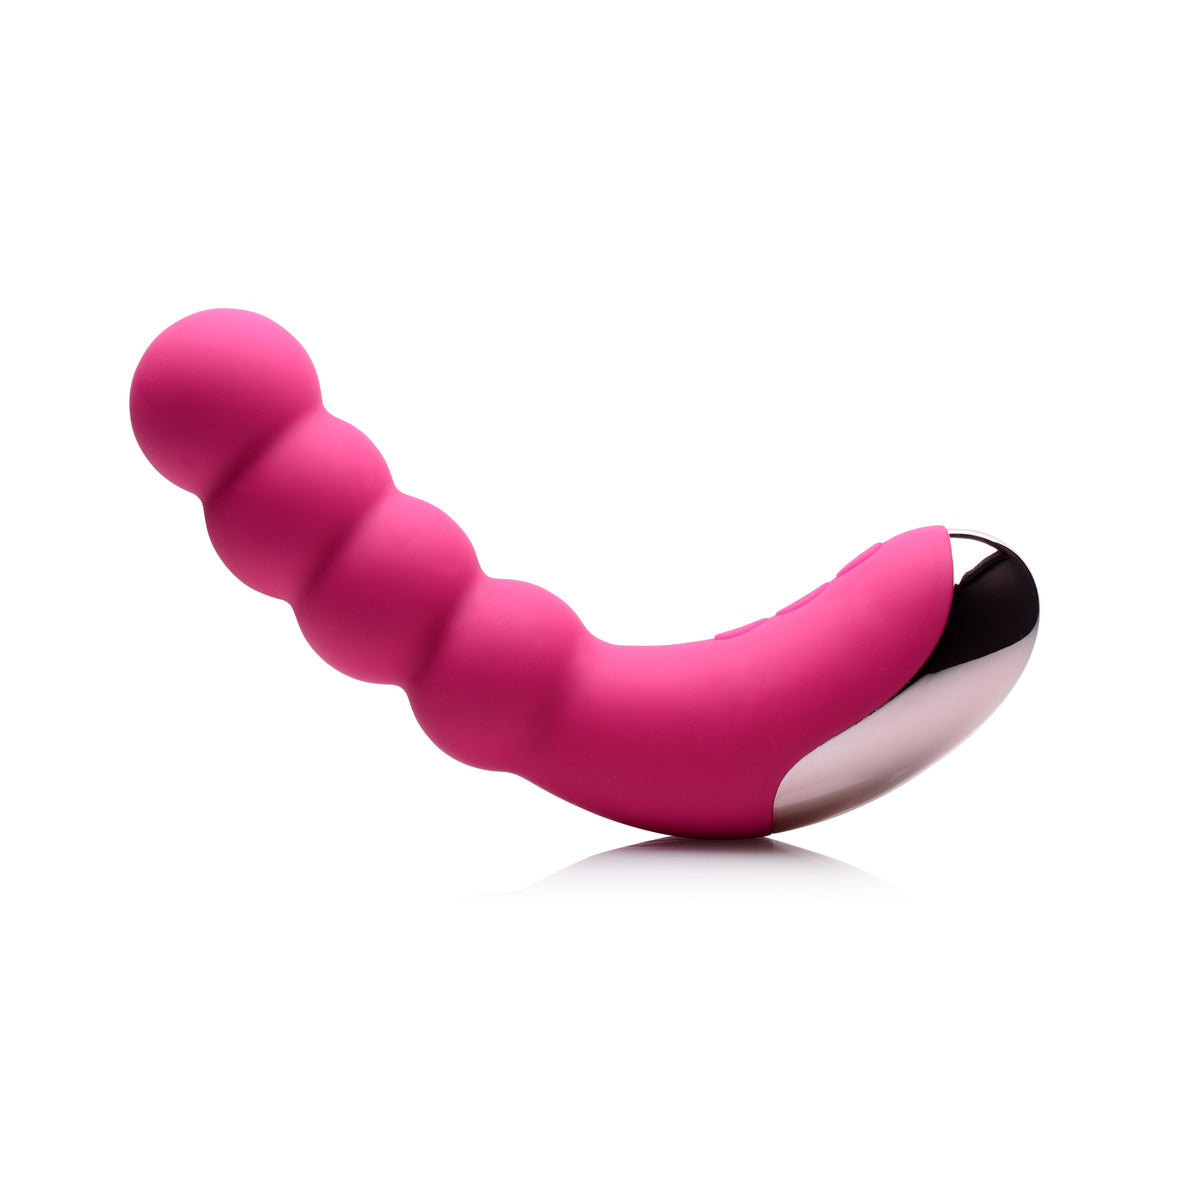 50X Silicone Beaded Vibrator - Pink